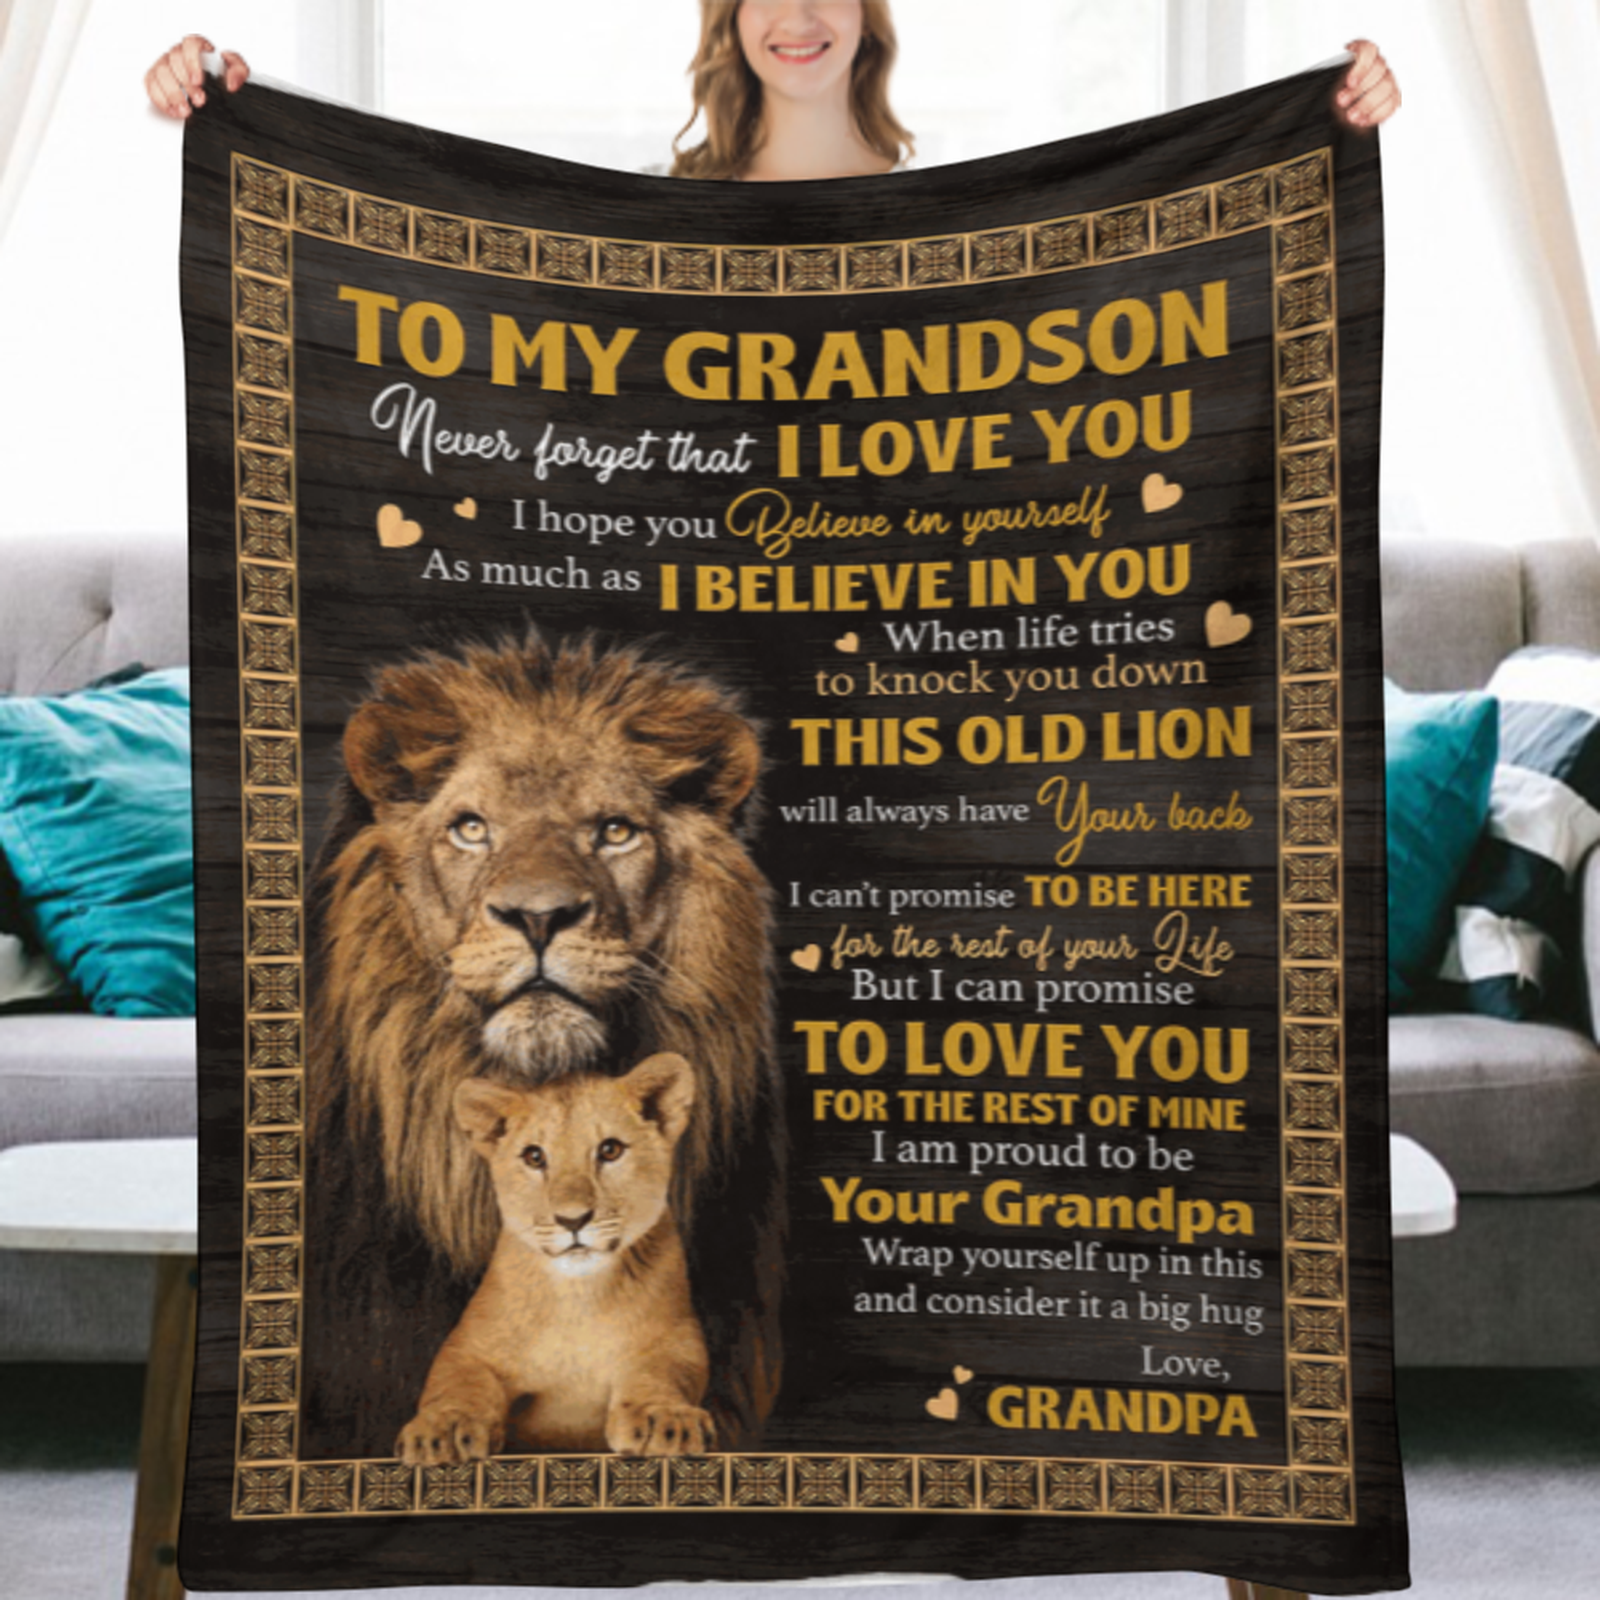 Grandpa & Grandson - To My Grandson Never Forget That I Love You